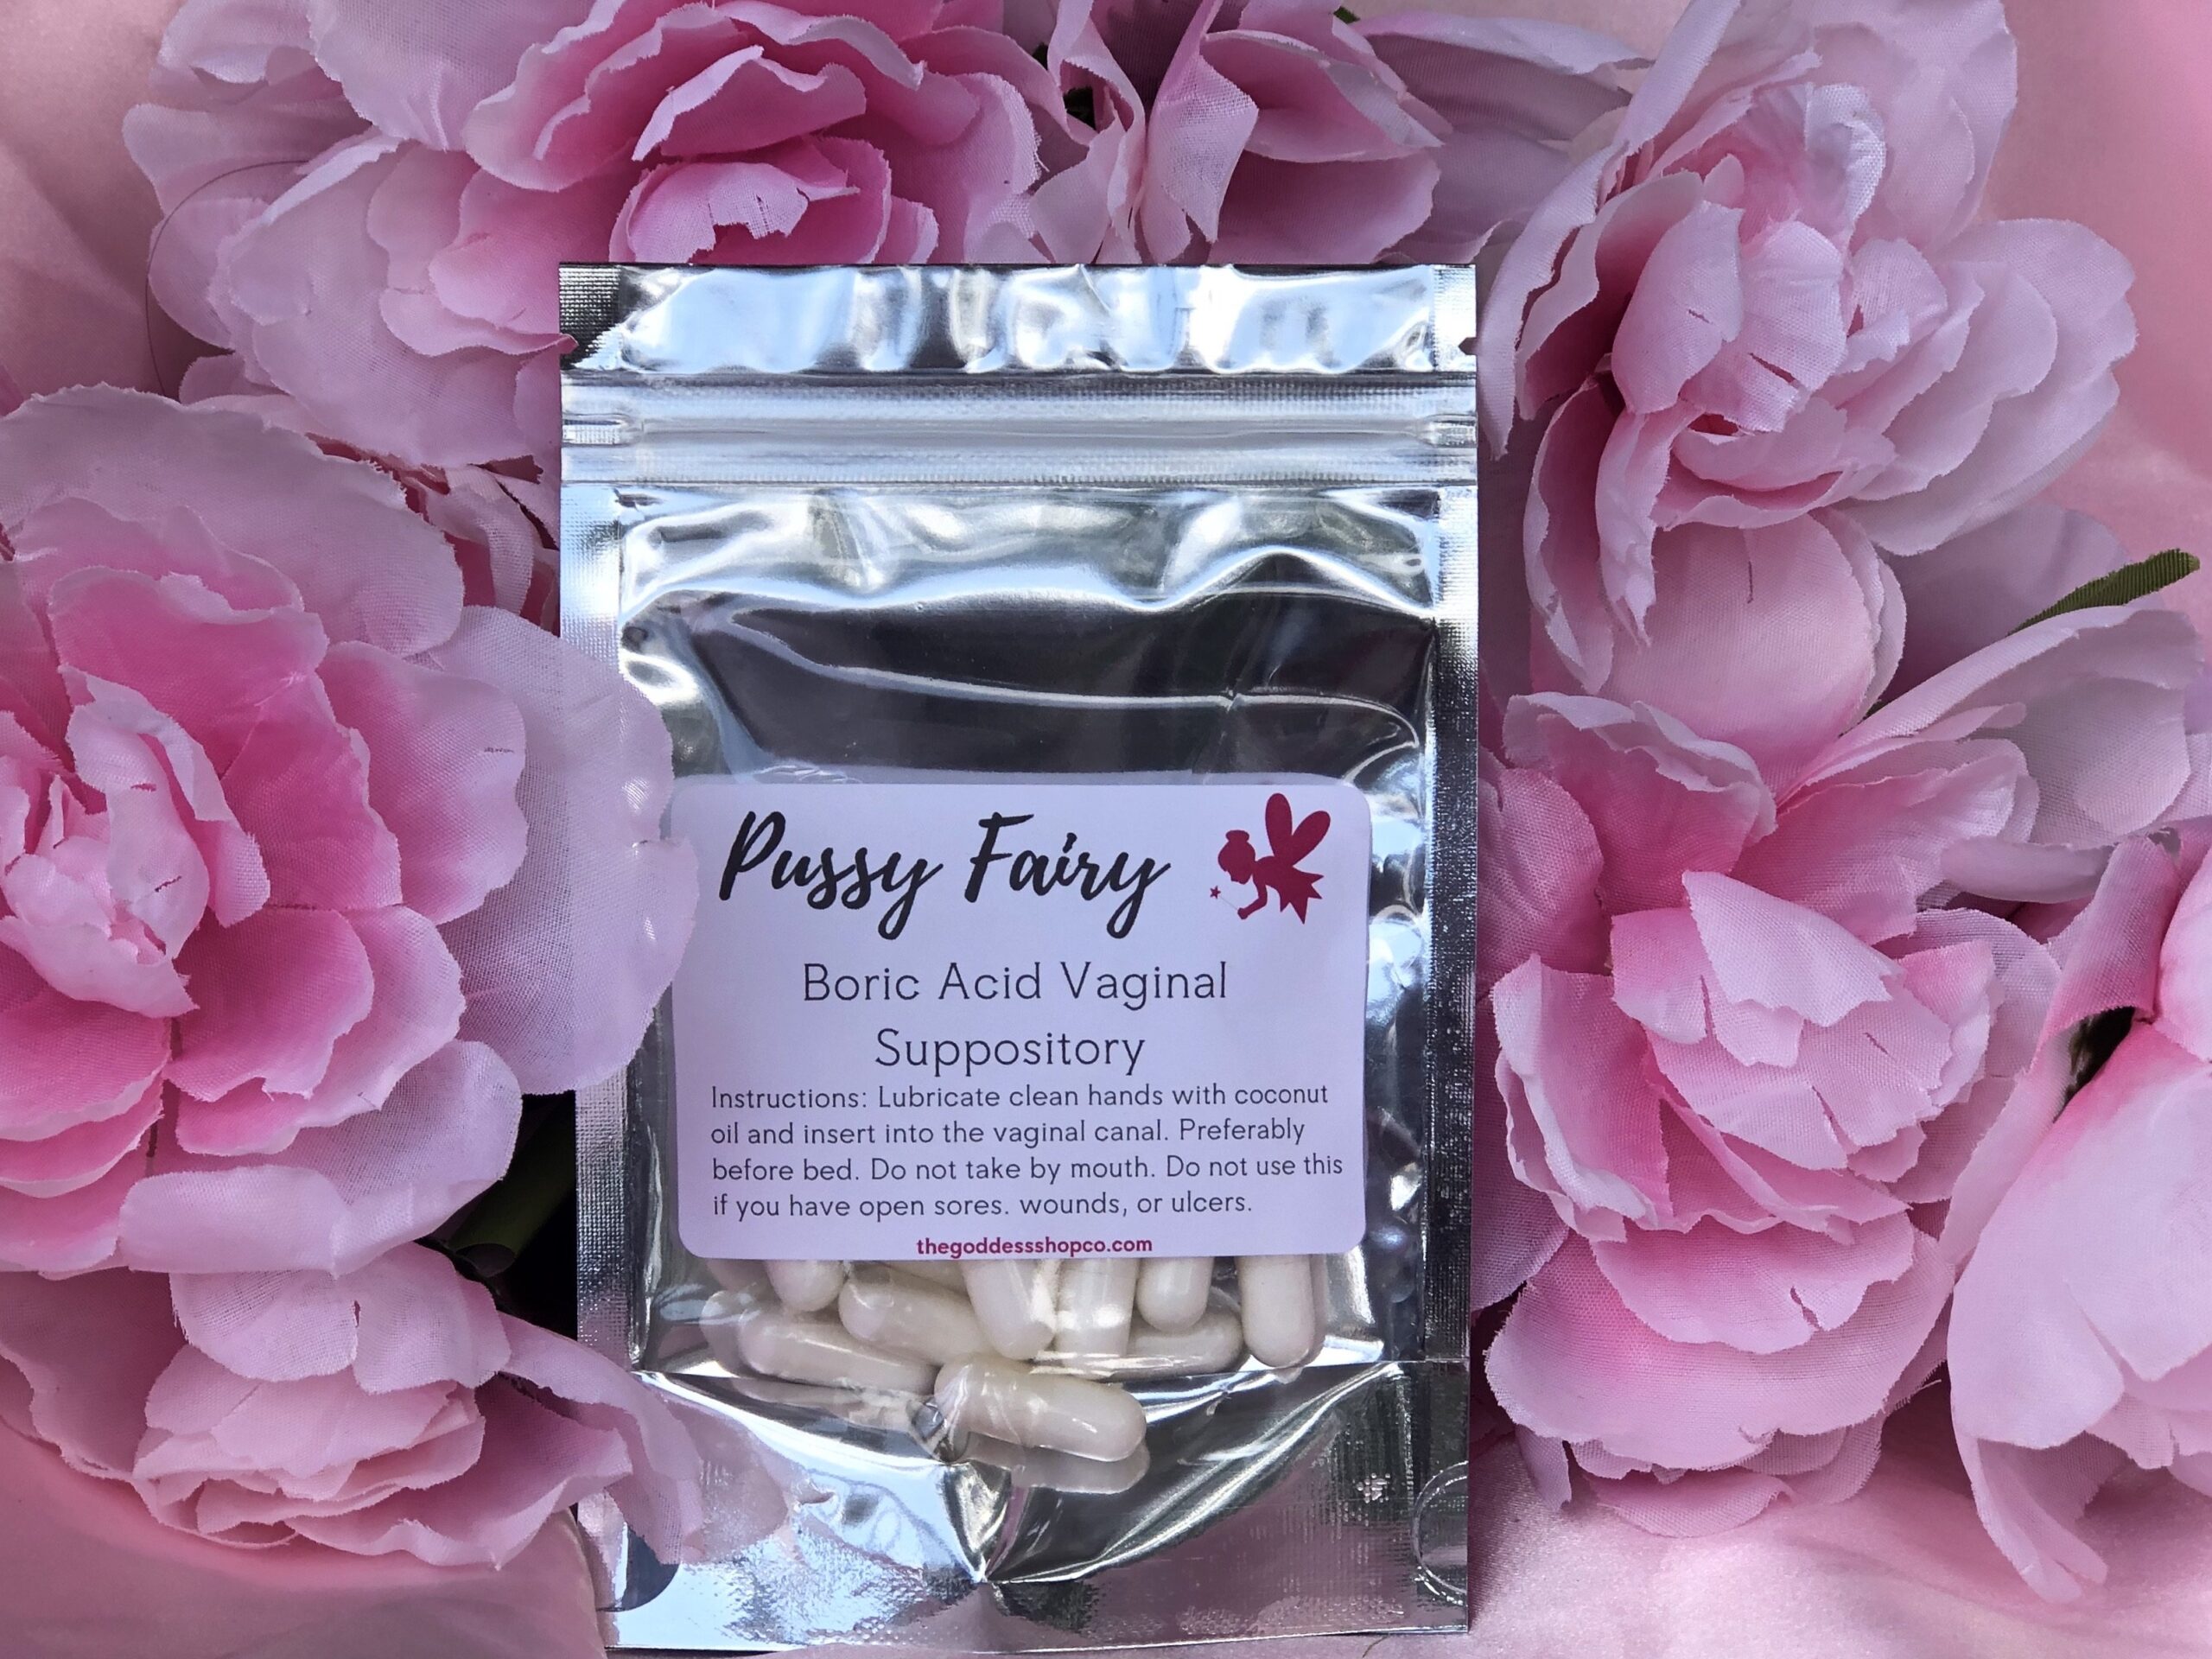 Pu$$y Fairy* Boric Acid Suppositories - Natural Alternative to Restore Vaginal Balance | Eliminates Odor | | Yeast infection | BV